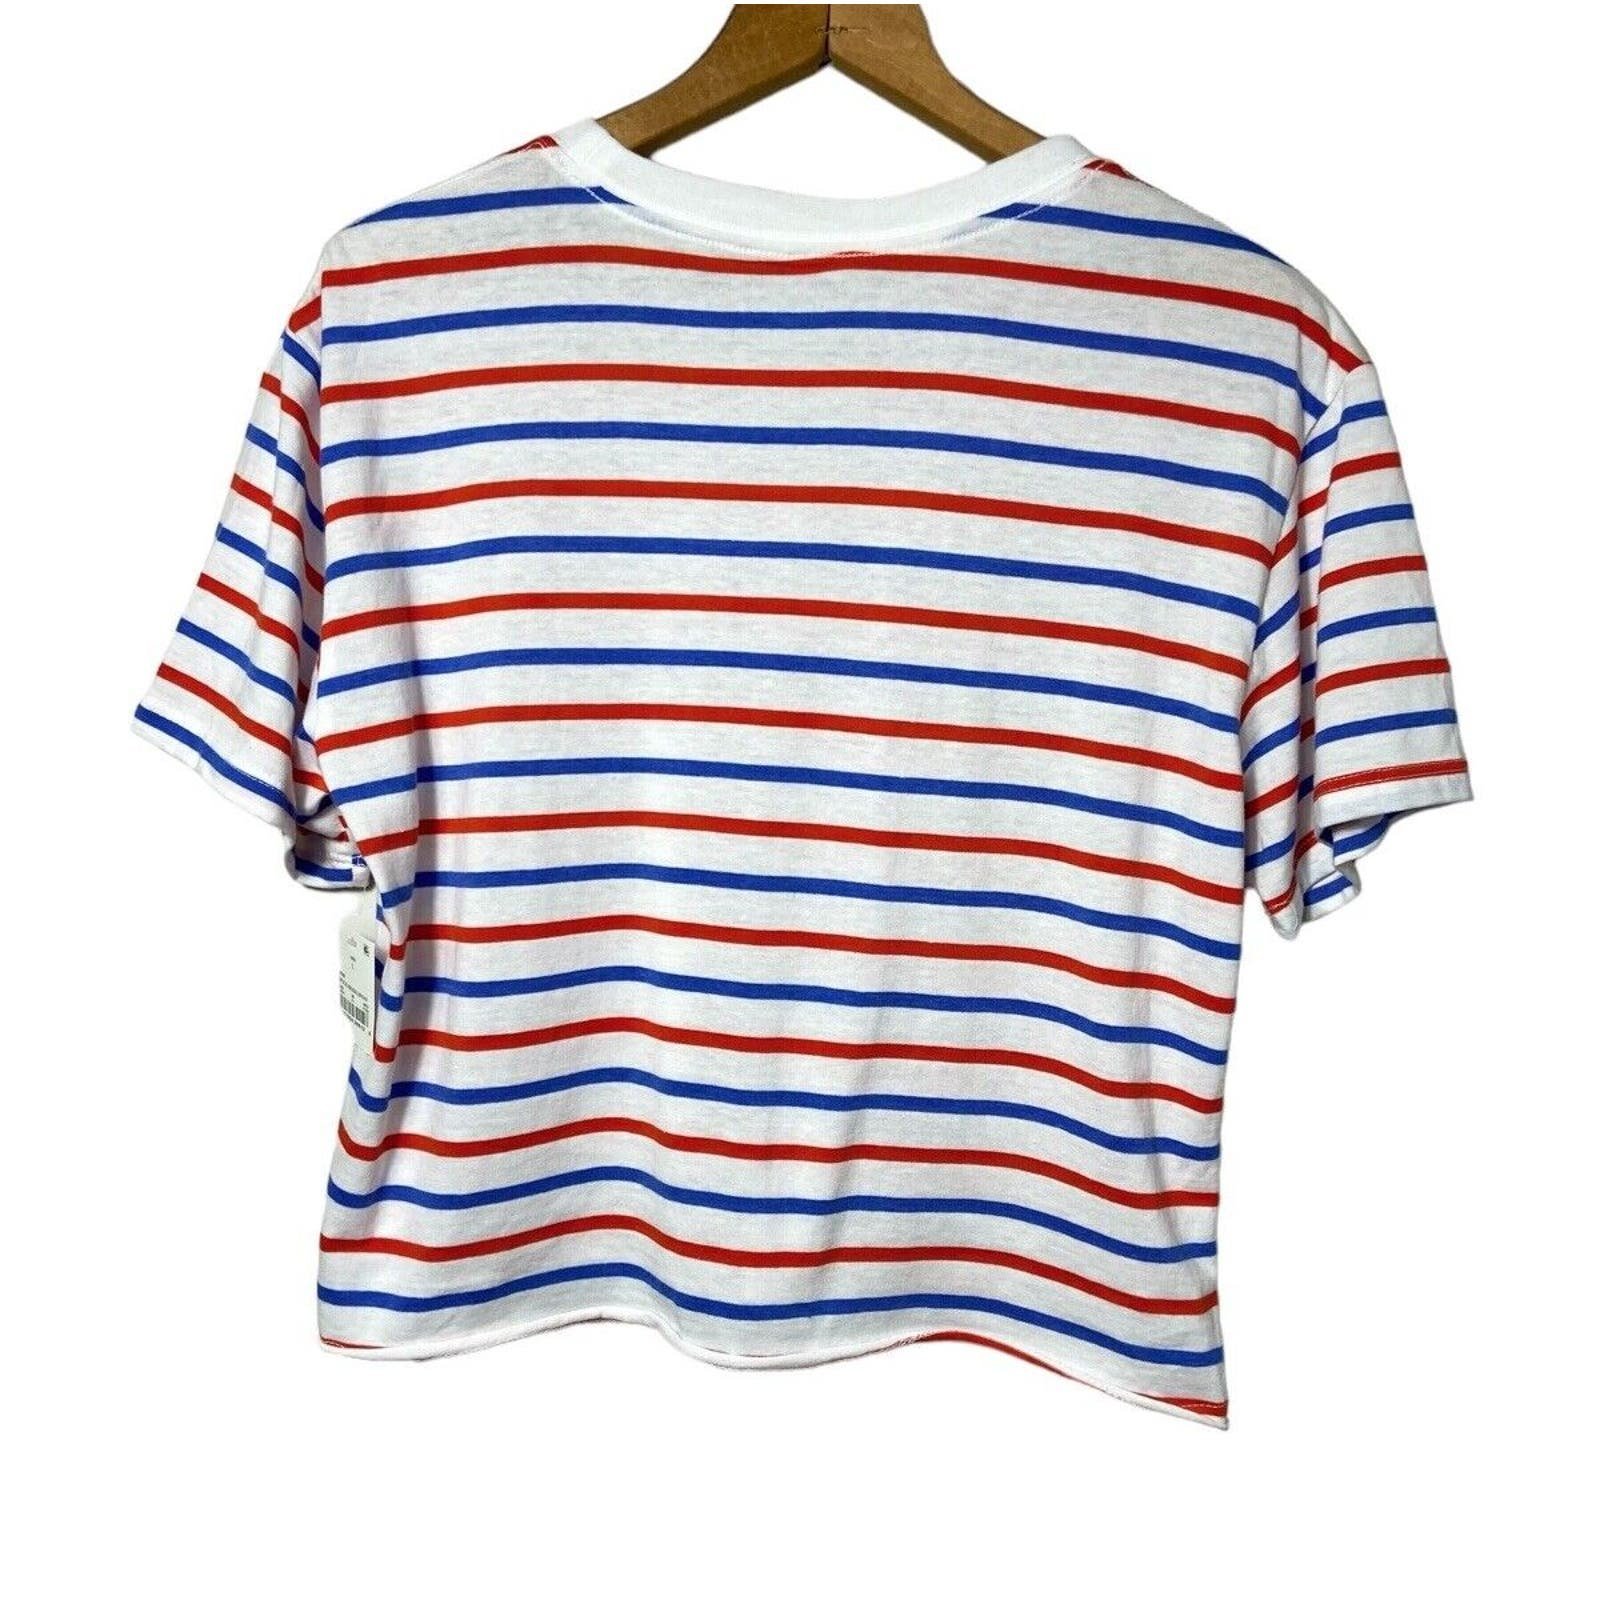 where to buy  Mighty Fine Striped USA Graphic Women´s Crop Top Red & Blue Stripes Size Large hVgygH2D1 Novel 